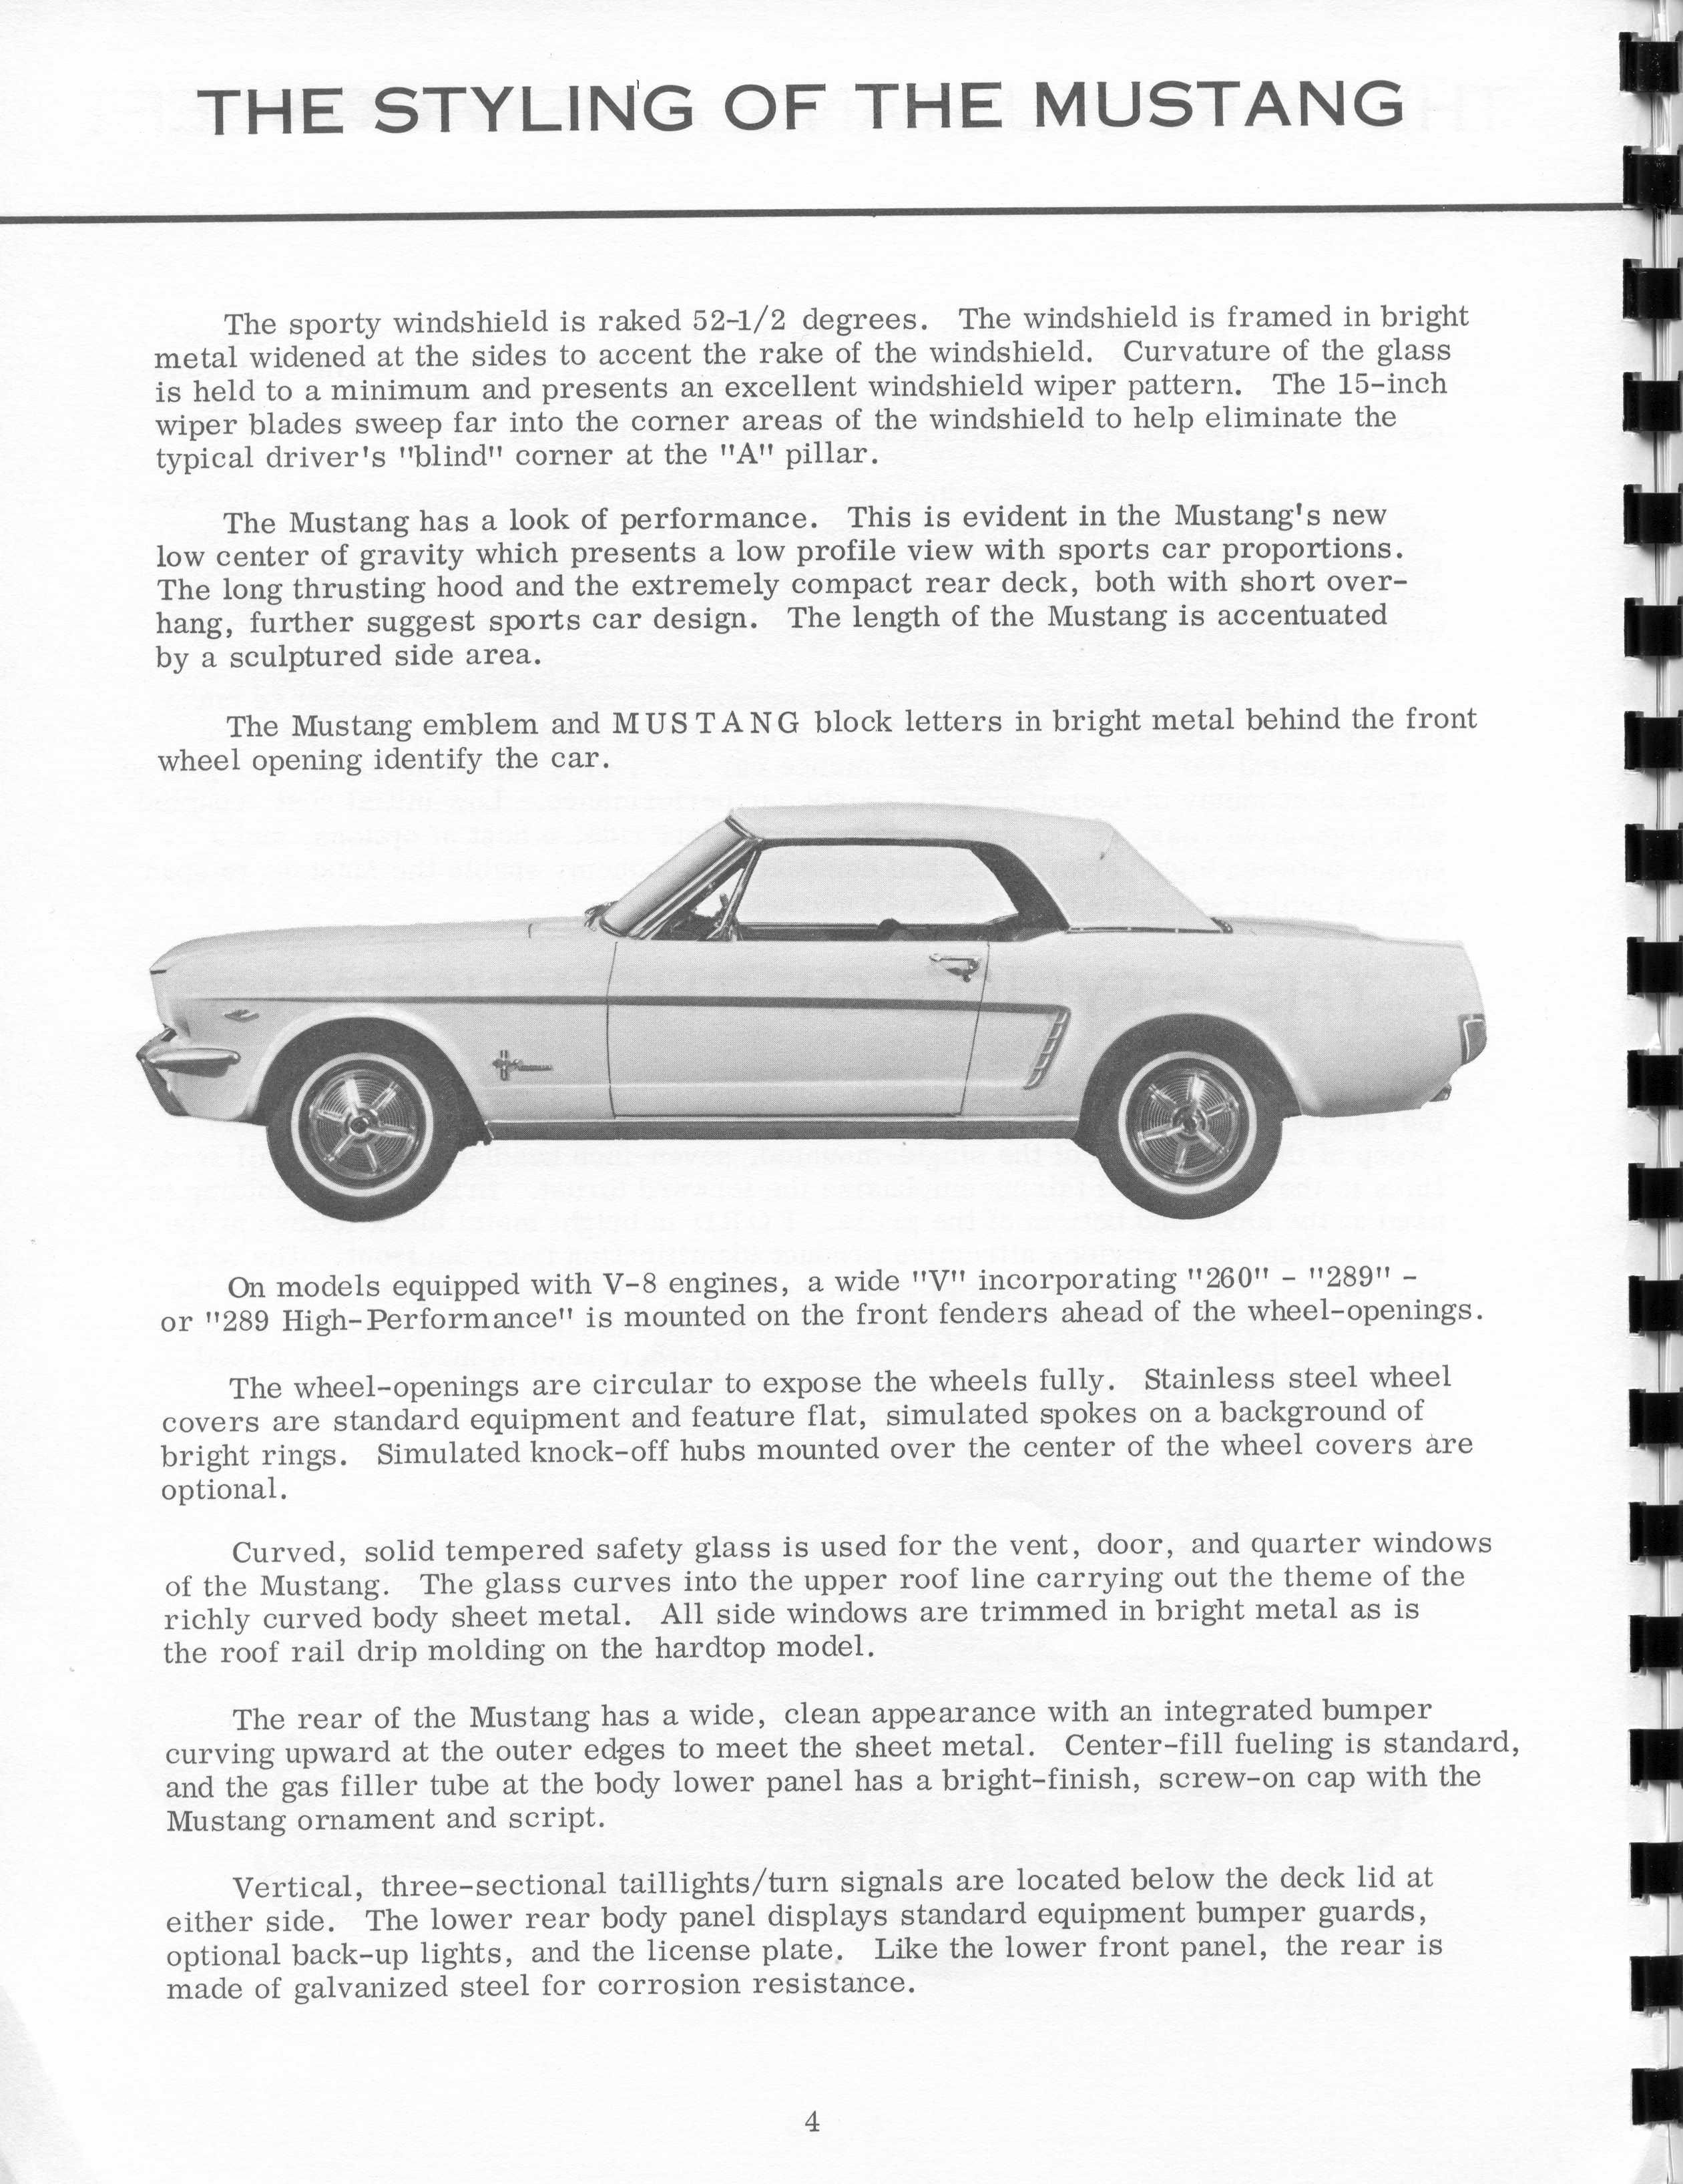 1964_Ford_Mustang_Press_Packet-04